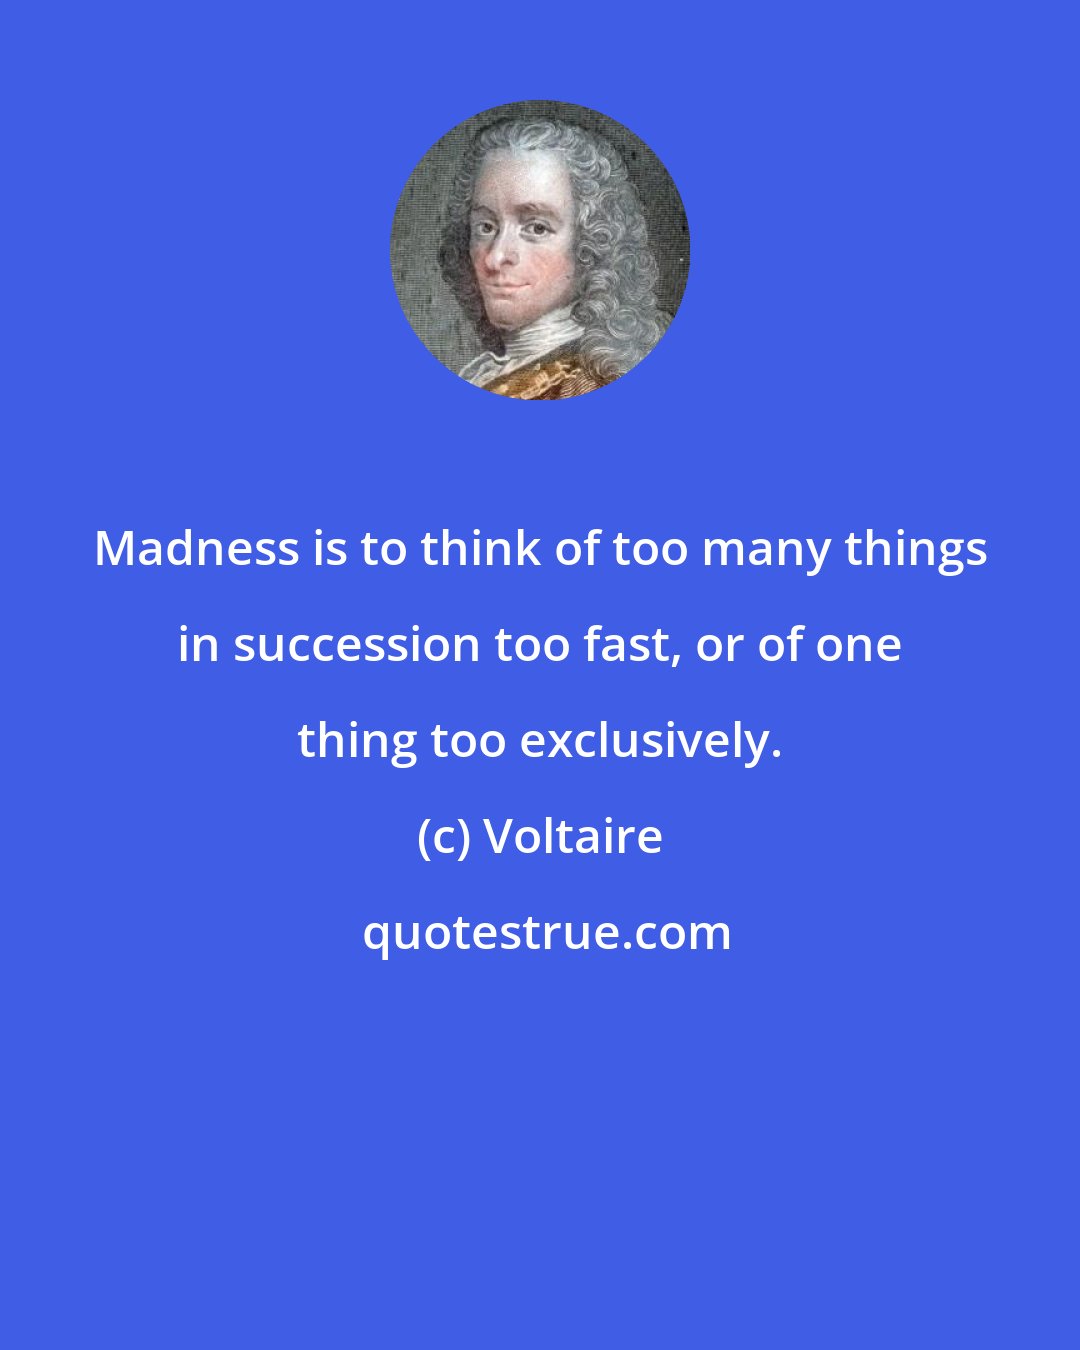 Voltaire: Madness is to think of too many things in succession too fast, or of one thing too exclusively.